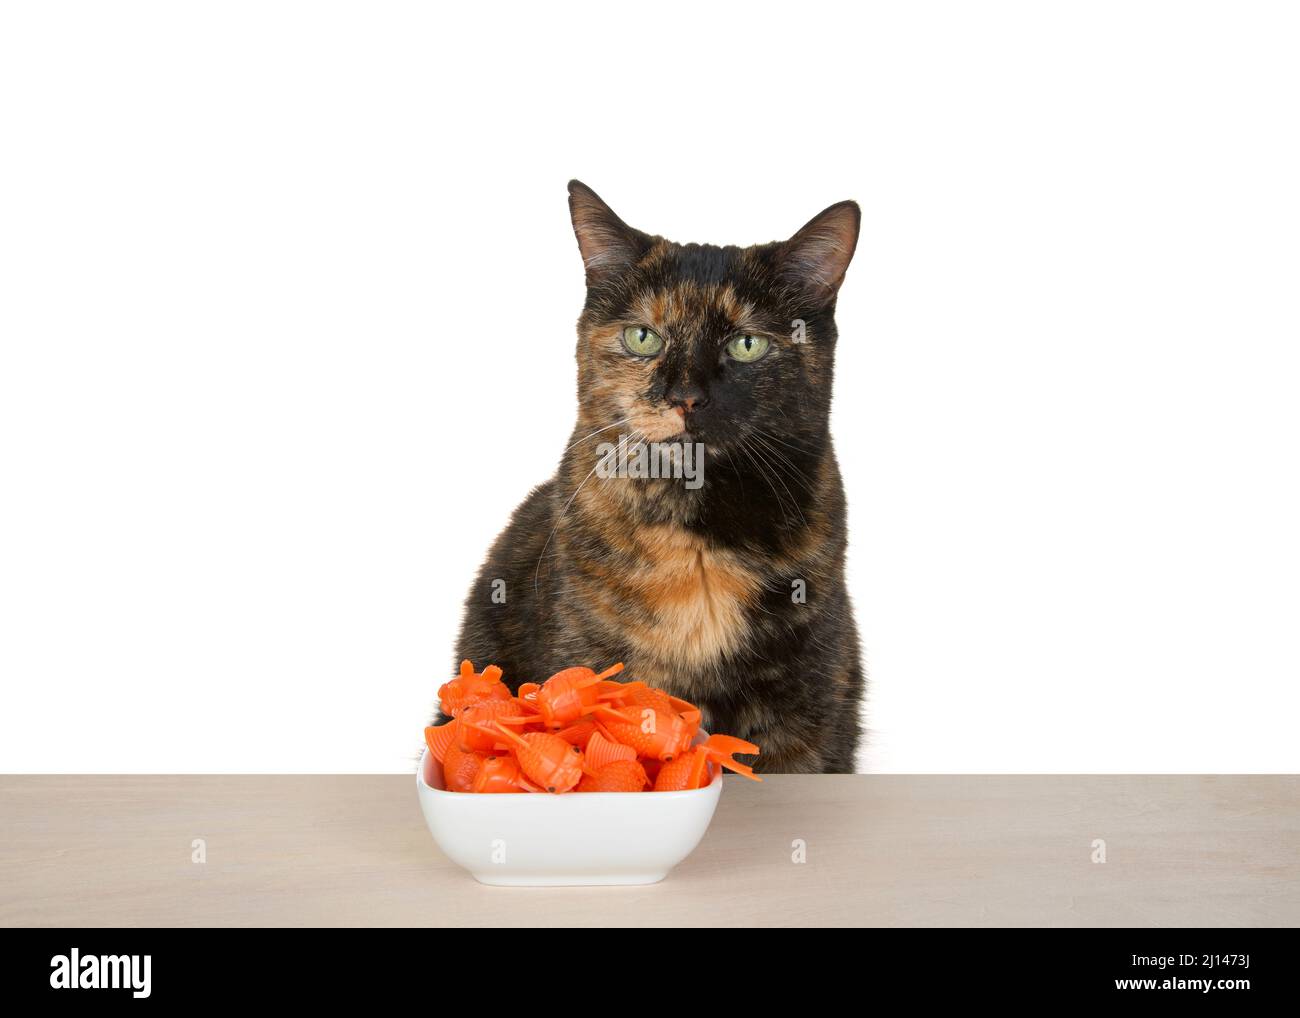 Black and orange torbie tortie tabby cat sitting at a light wood table with square white porcelain bowl full of orange gold fish. Cat looking at viewe Stock Photo